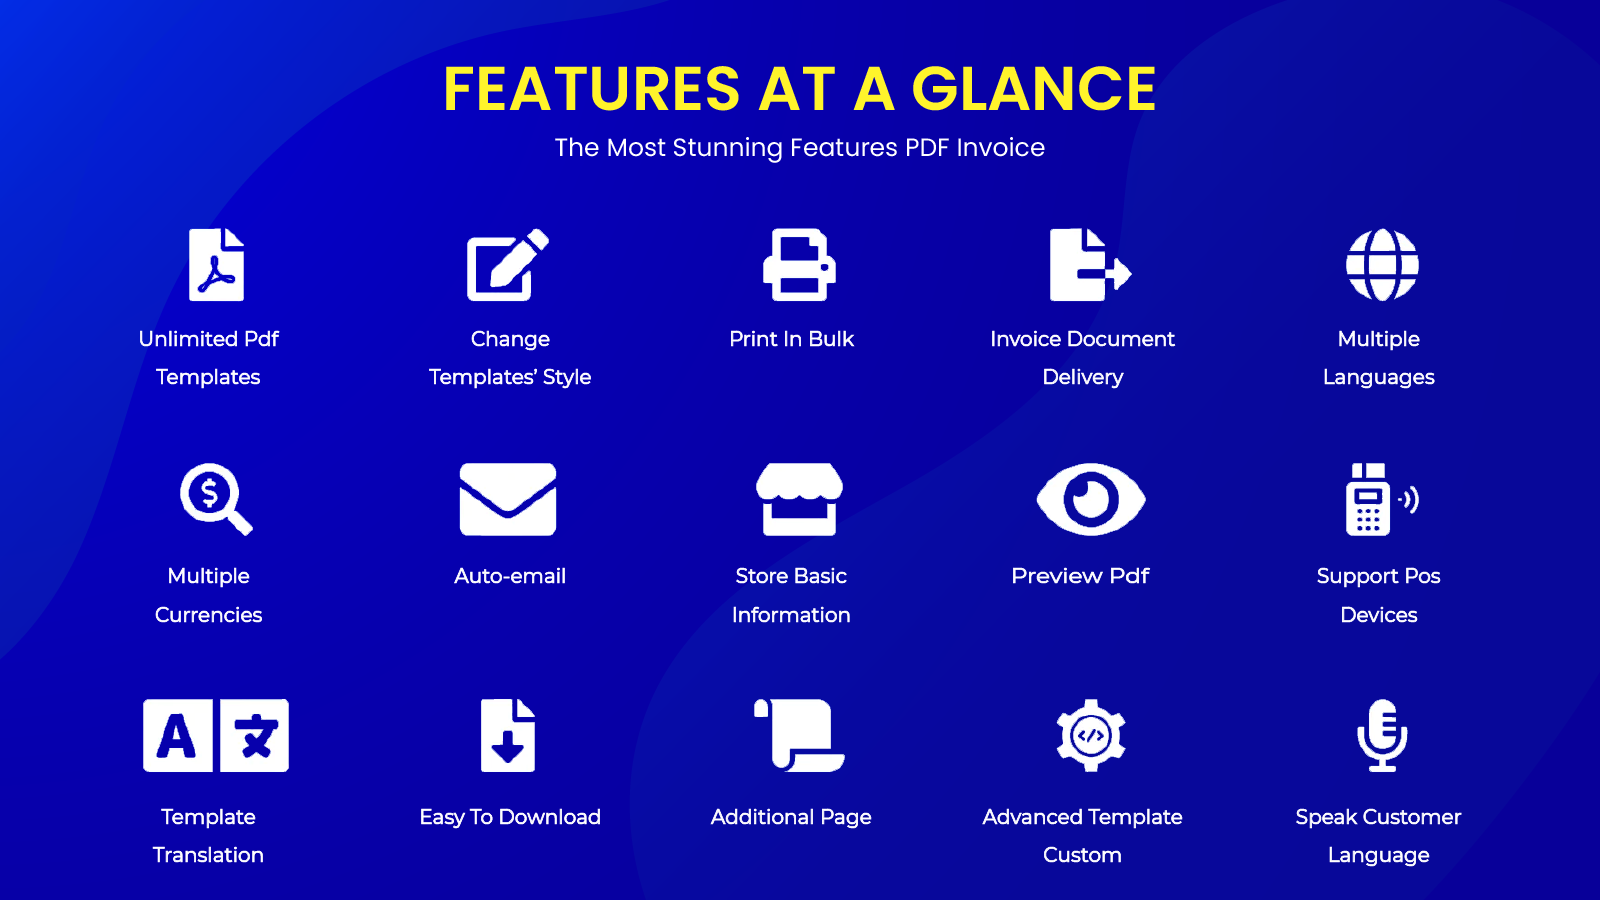 Features at a glance